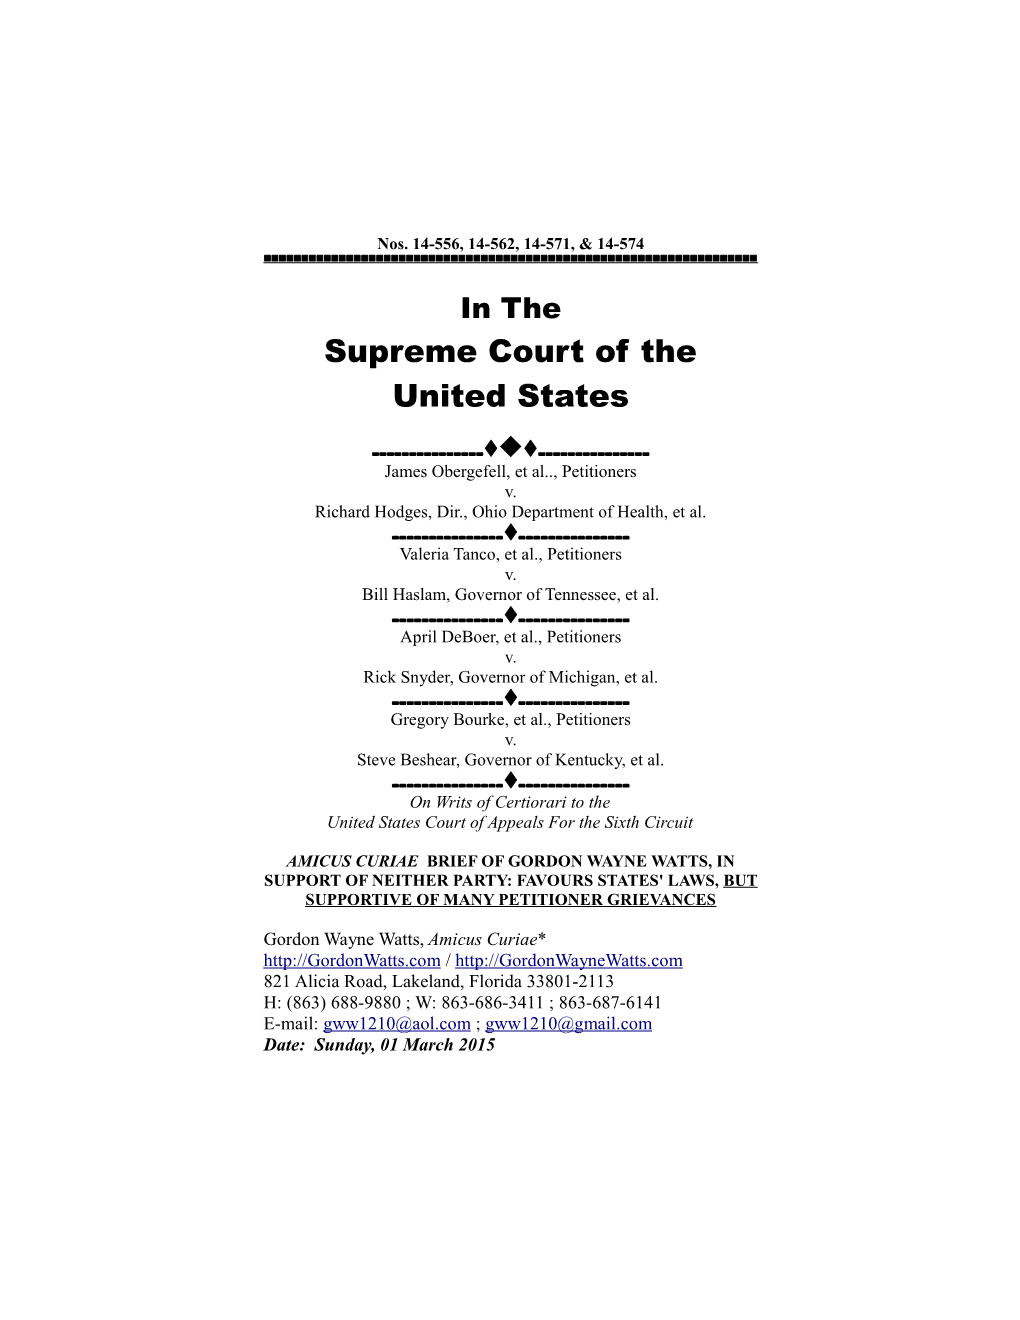 Supreme Court of the United States s12